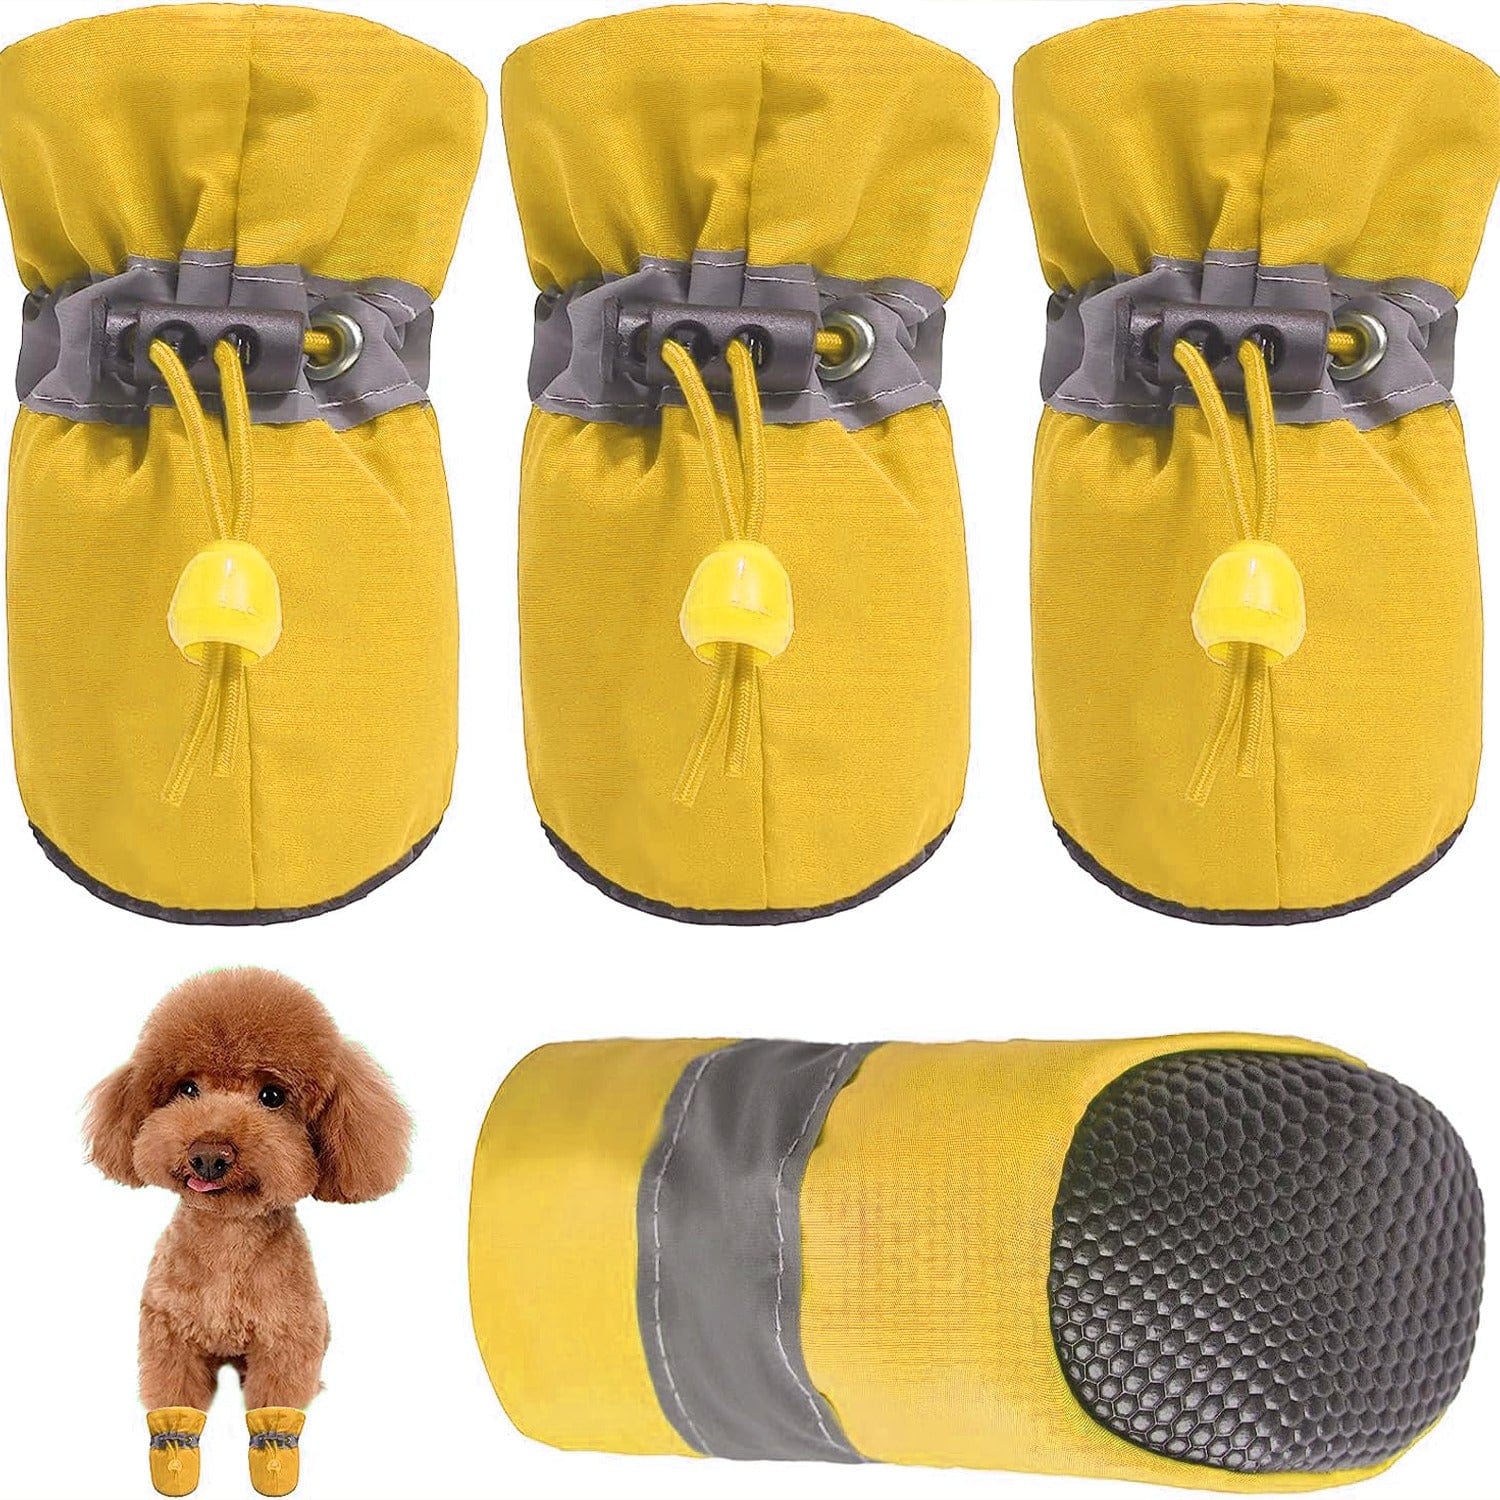 kutkutstyle dog shoes KUTKUT Washable Dog Boots Paw Protector for Hot Pavement | Pack of 4pcs Anti-Slip Dog Shoes with Reflective Straps for Small Breed Dogs (Yellow)